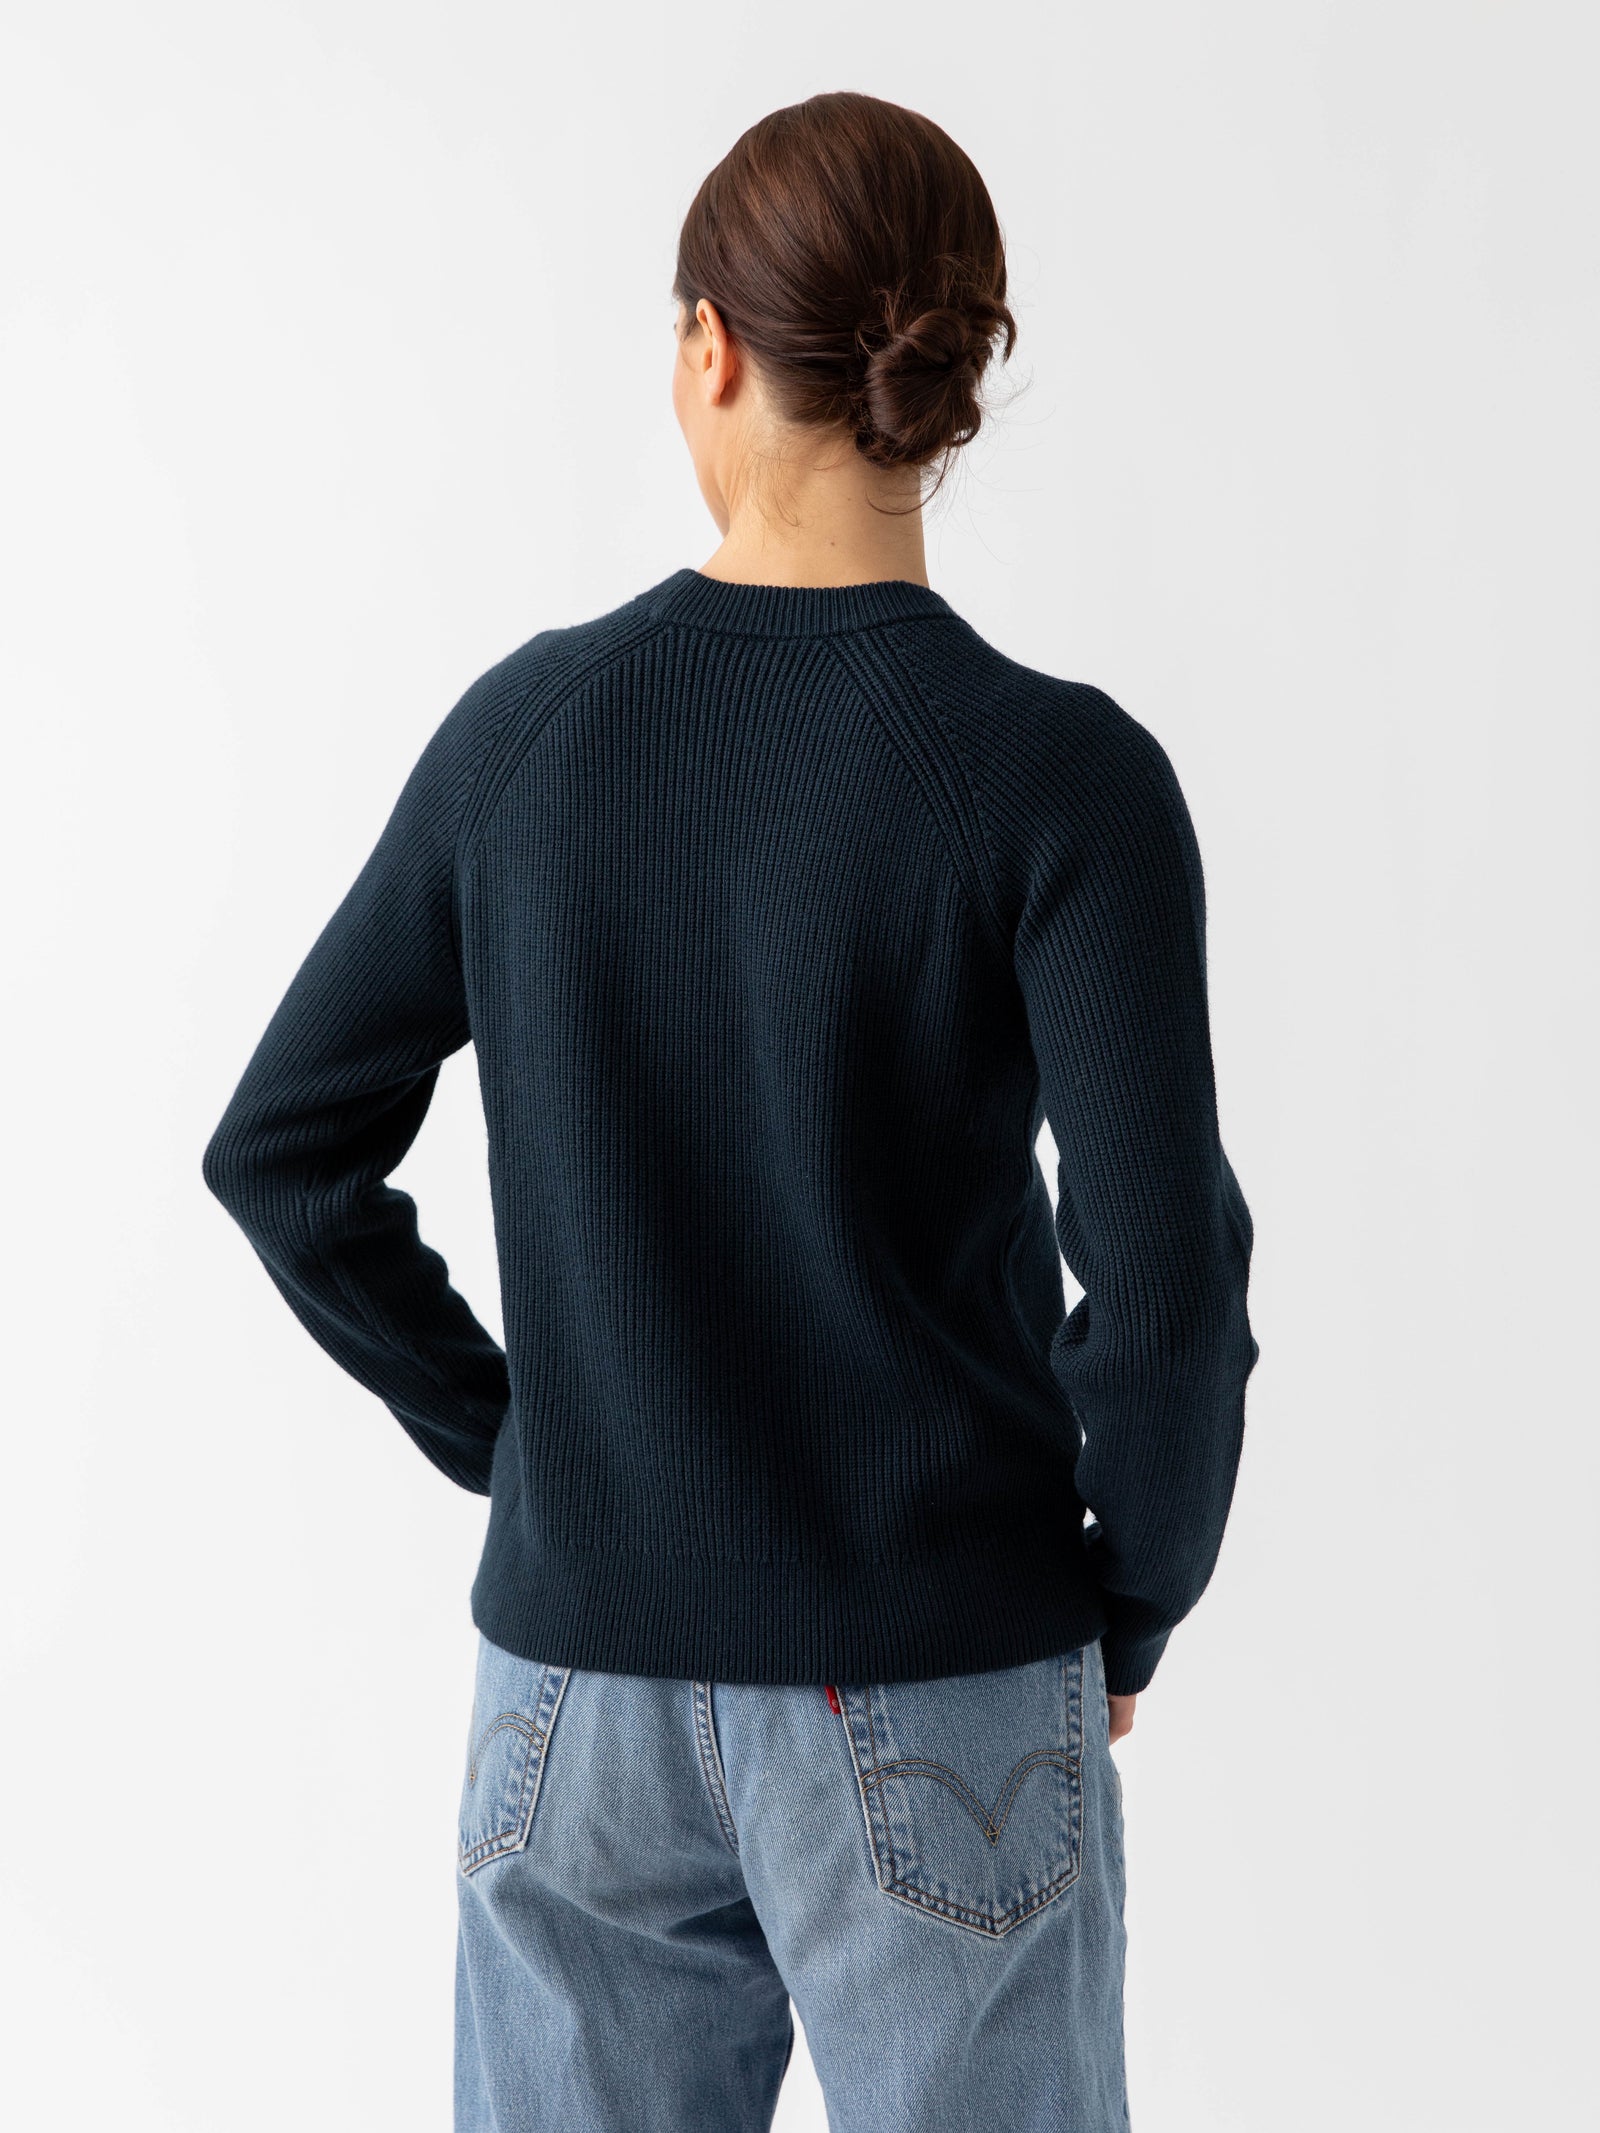 Back of woman wearing eclipse classic crewneck and jeans with white background 